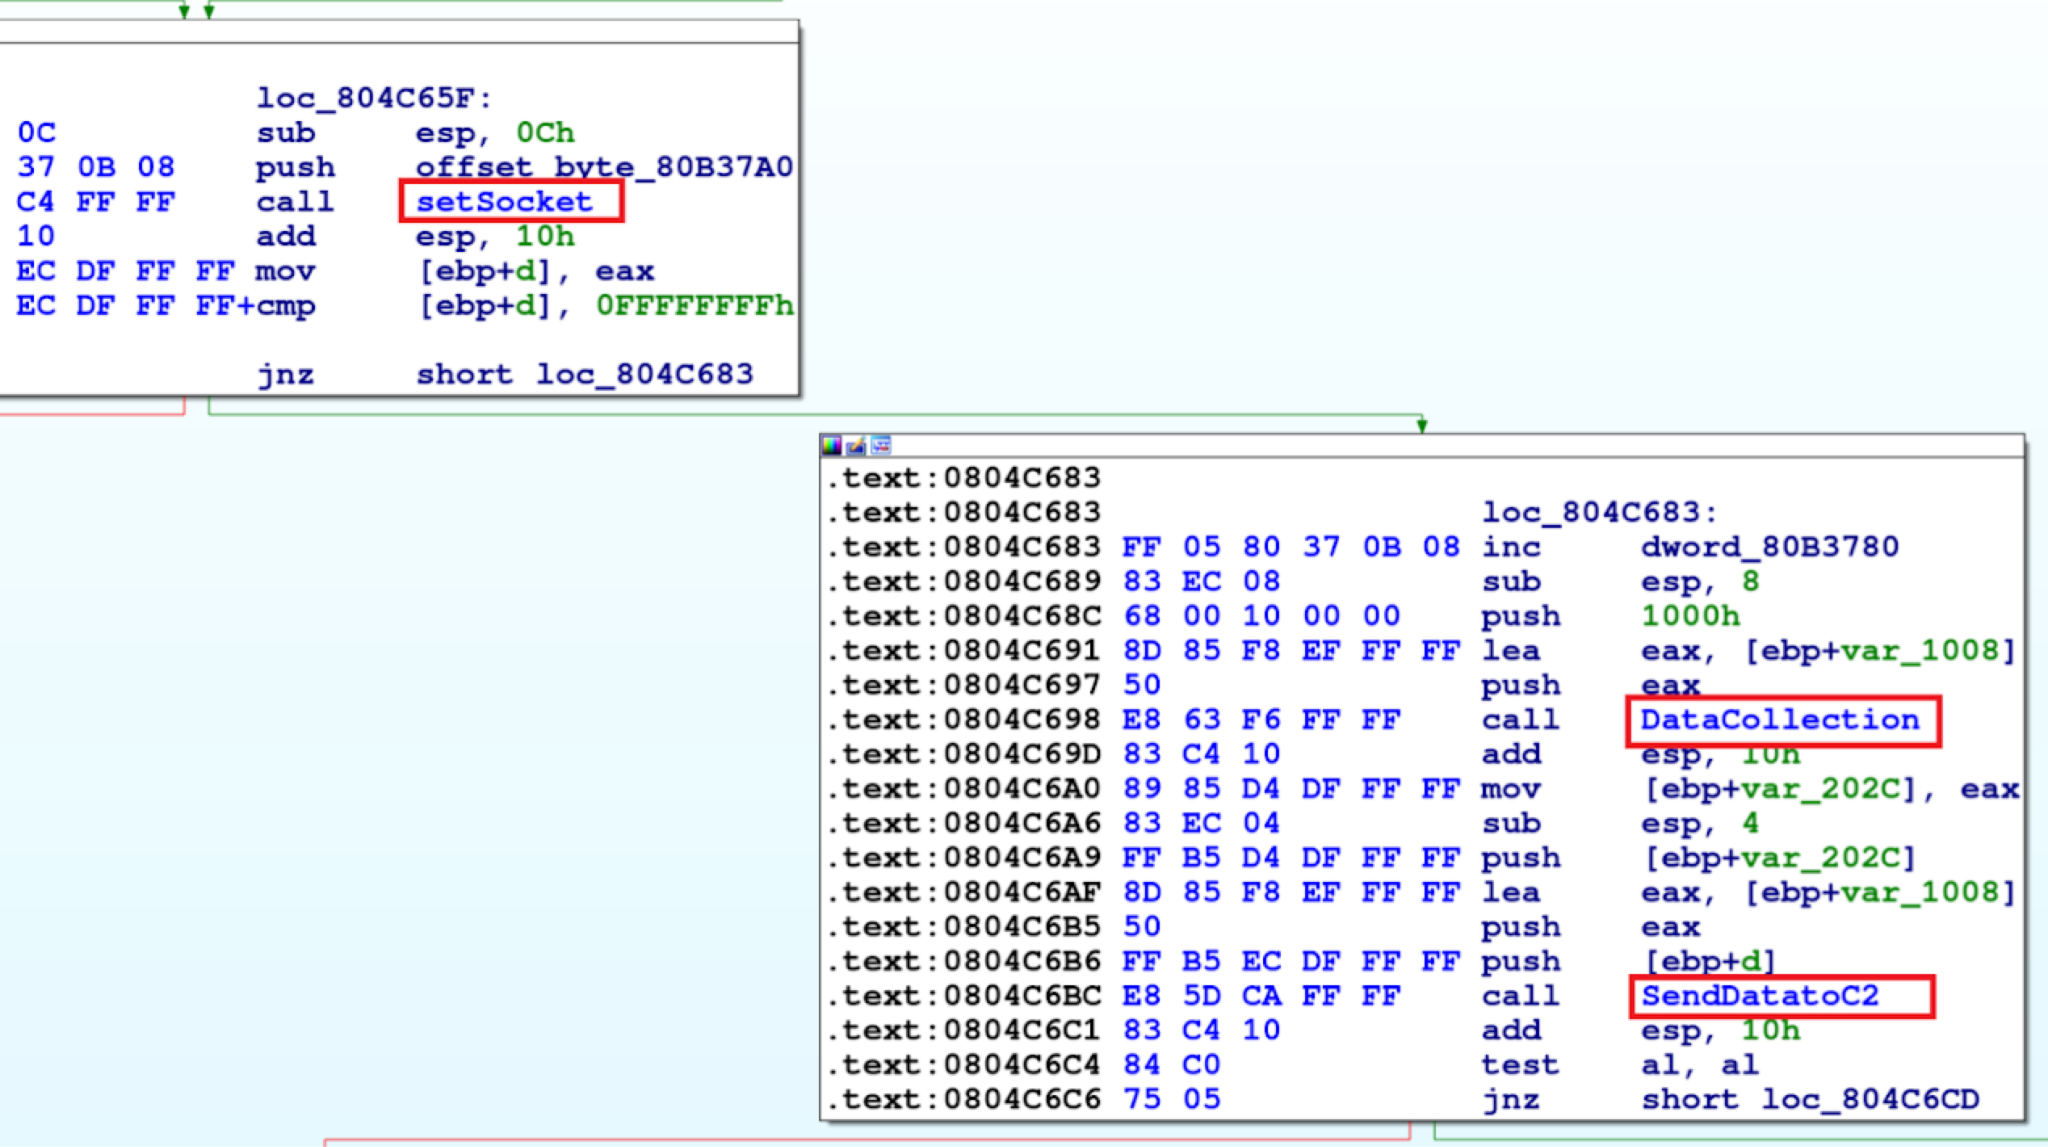 Image 3 is a screenshot of the code flow and a disassembler. Highlighted in red on the top left is SetSocket. Highlighted in red on the bottom right is DataCollection and SendDatatoC2.